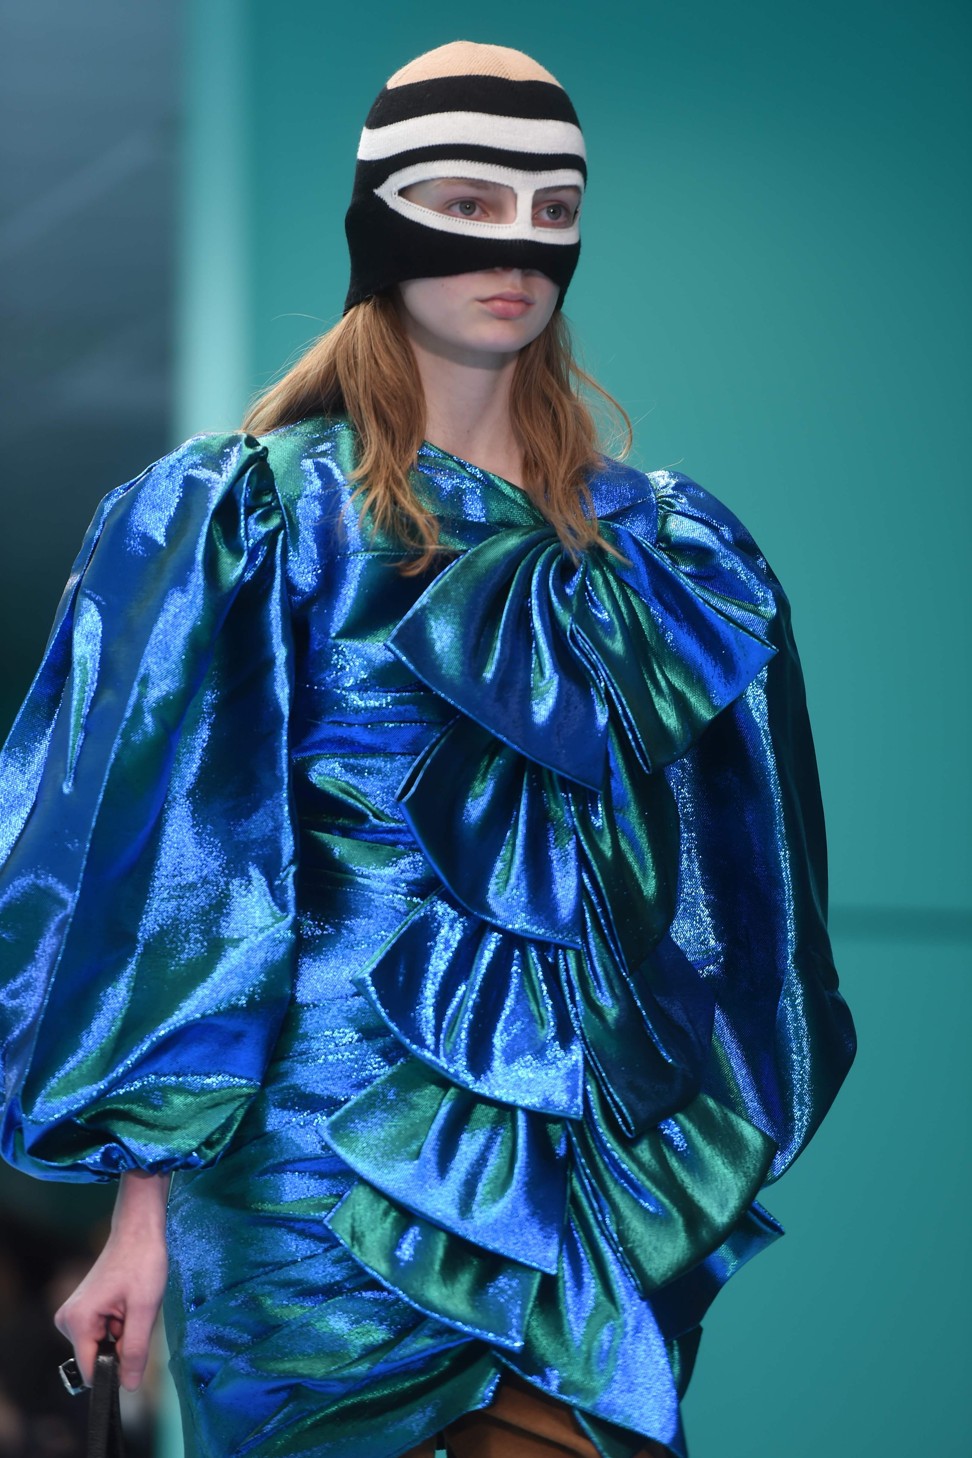 Milan Fashion Week: Gucci creates buzz with baby dragons, snakes, and ...